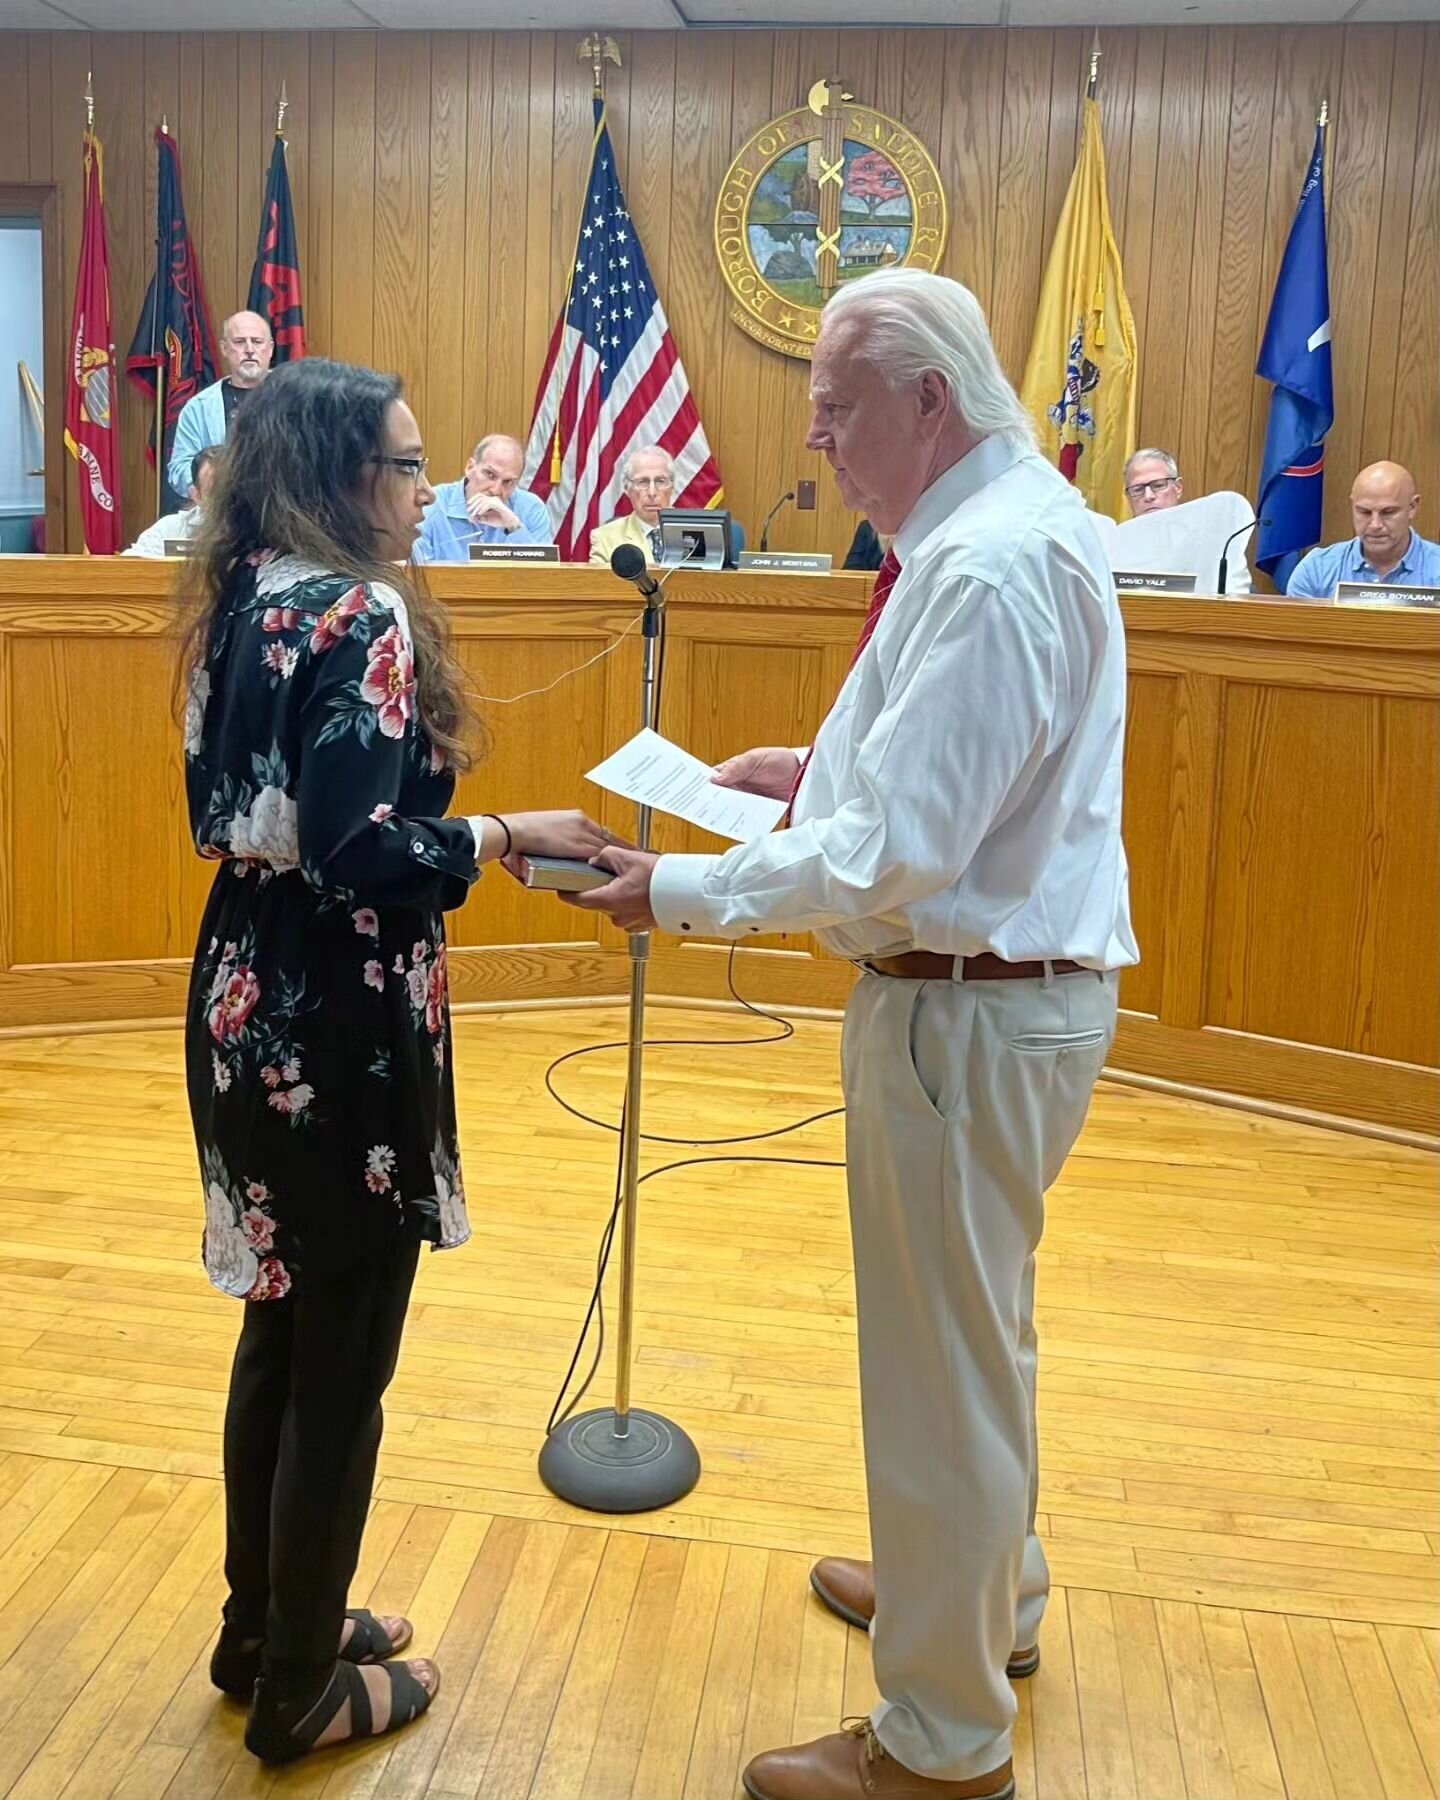 It's official- I took the oath with our town's Mayor to be sworn in as a New Jersey Planning Official!

I am proud to be a citizen architect and engage in civic advocacy. Representation matters!